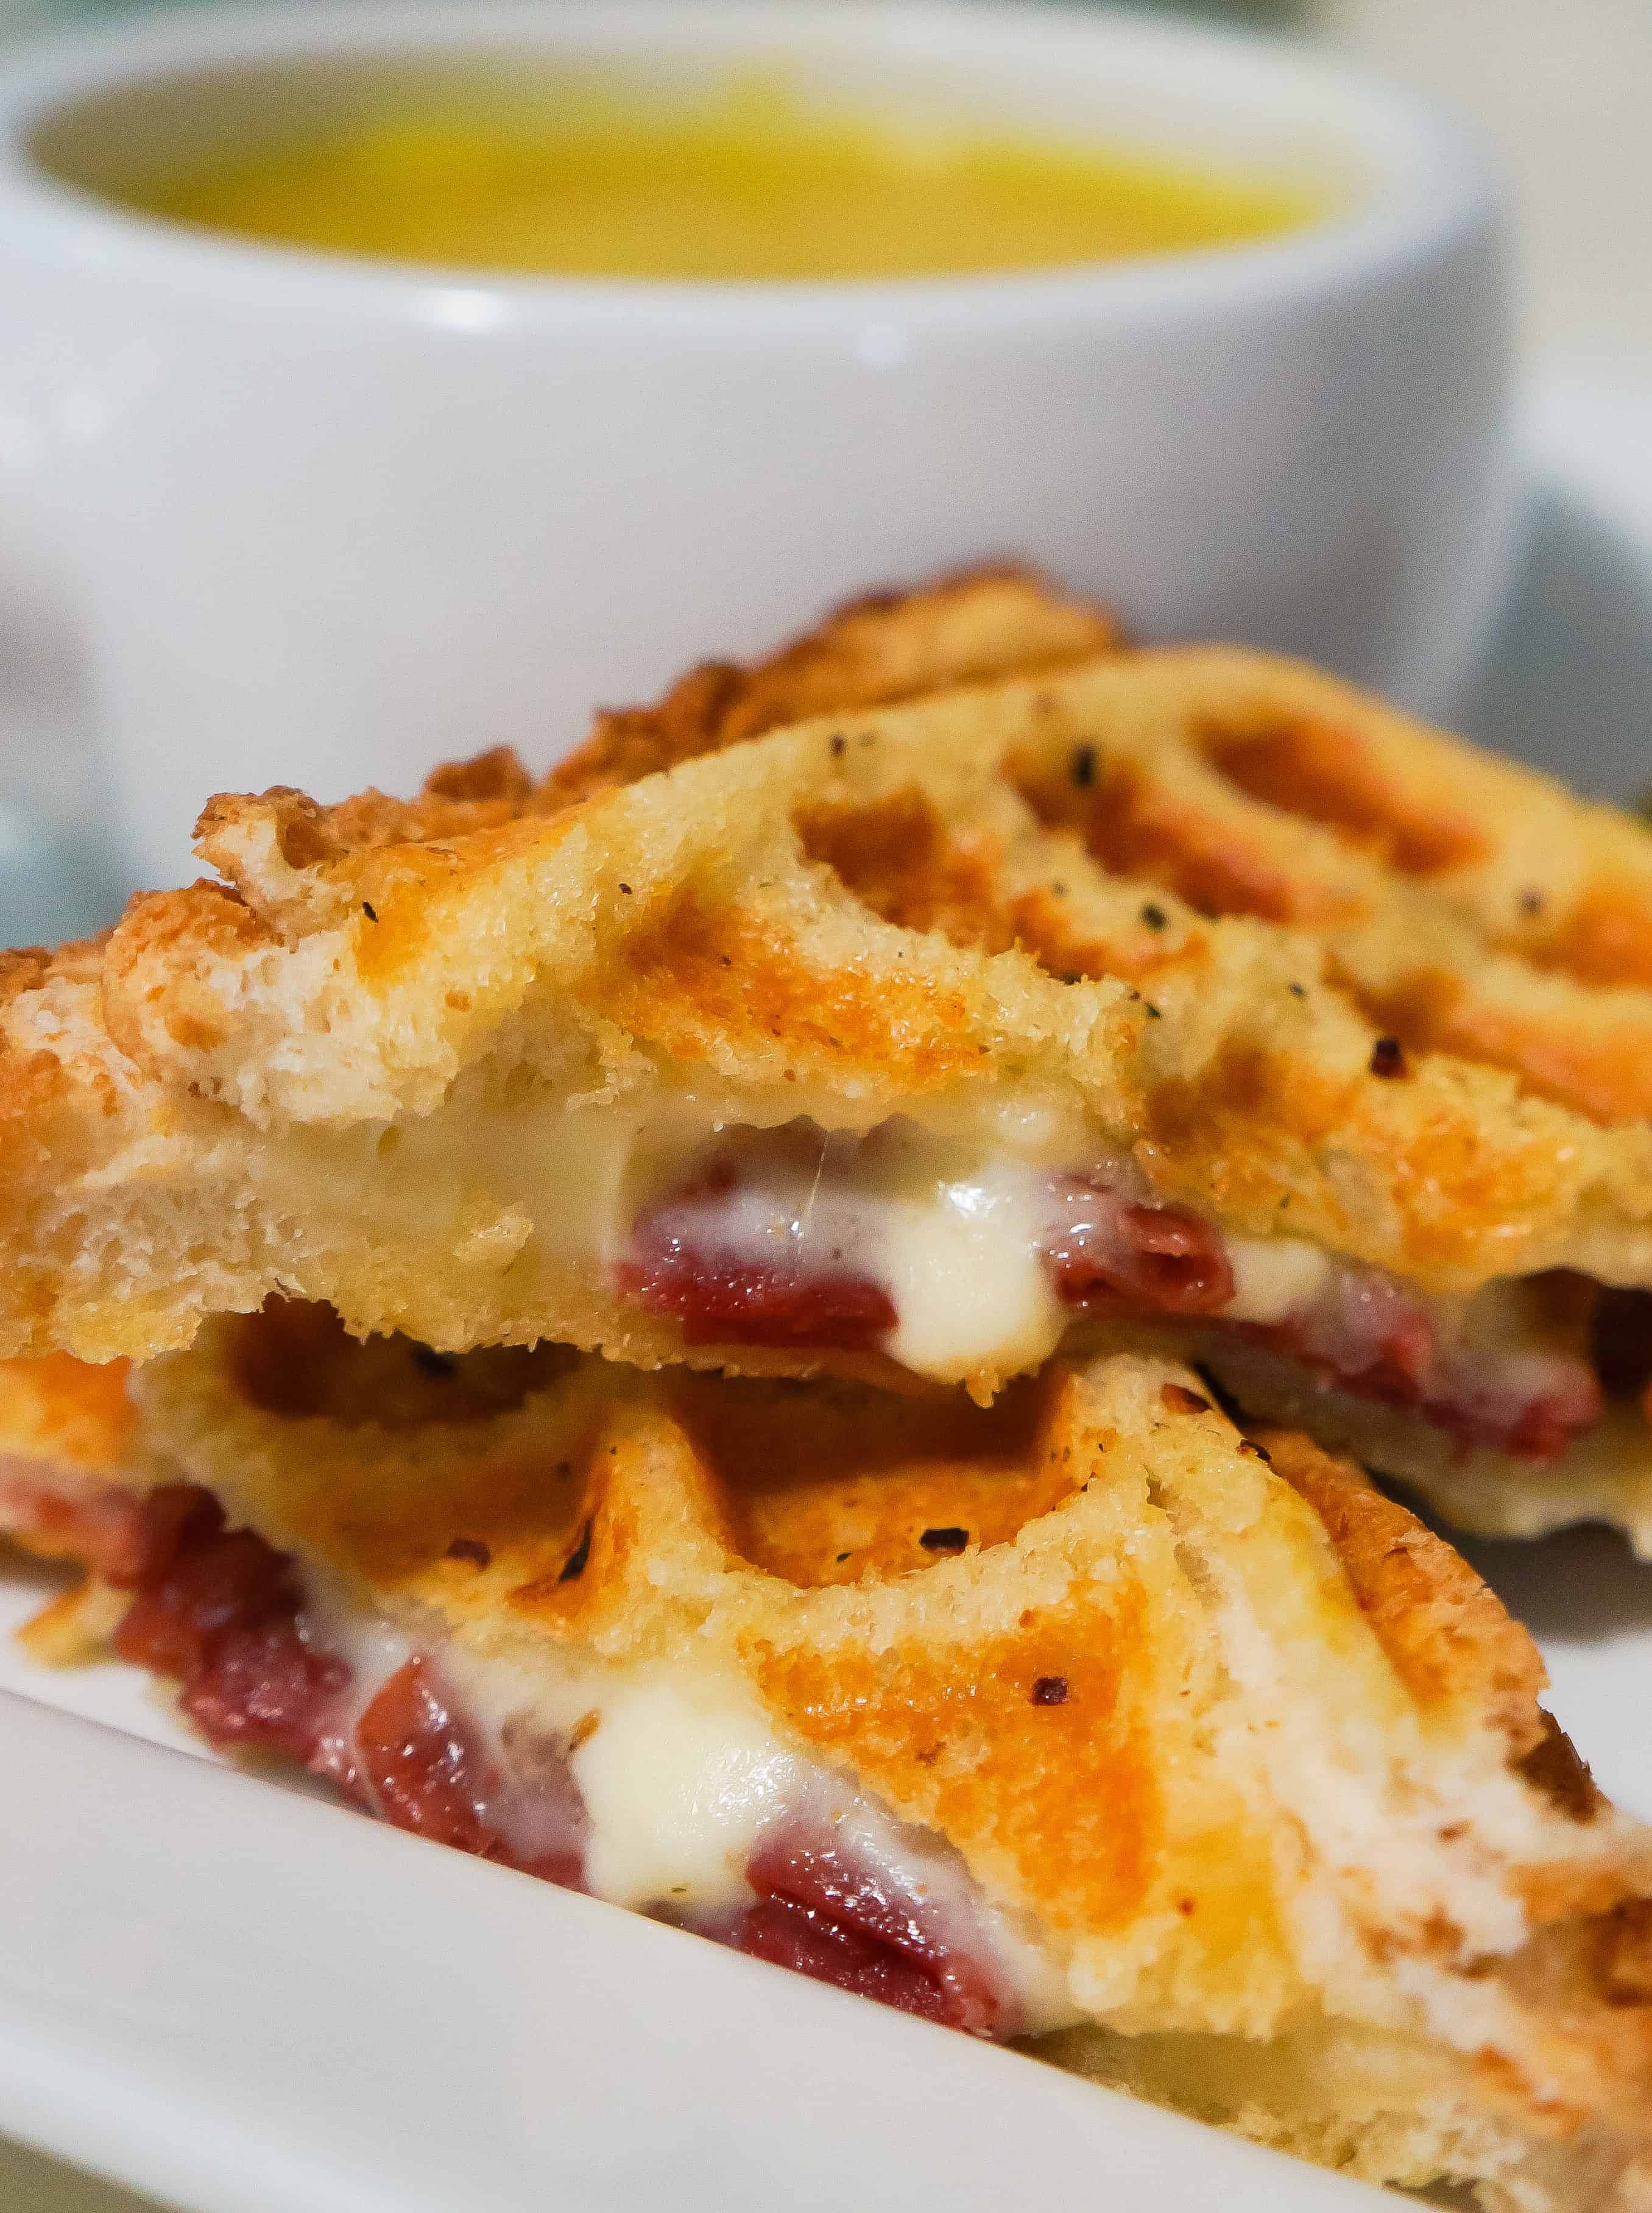 Grilled cheese sandwich with sauteed onions, corned beef and Havarti cheese cooked in a waffle maker. This waffled grilled cheese is perfect for lunch or a quick dinner.